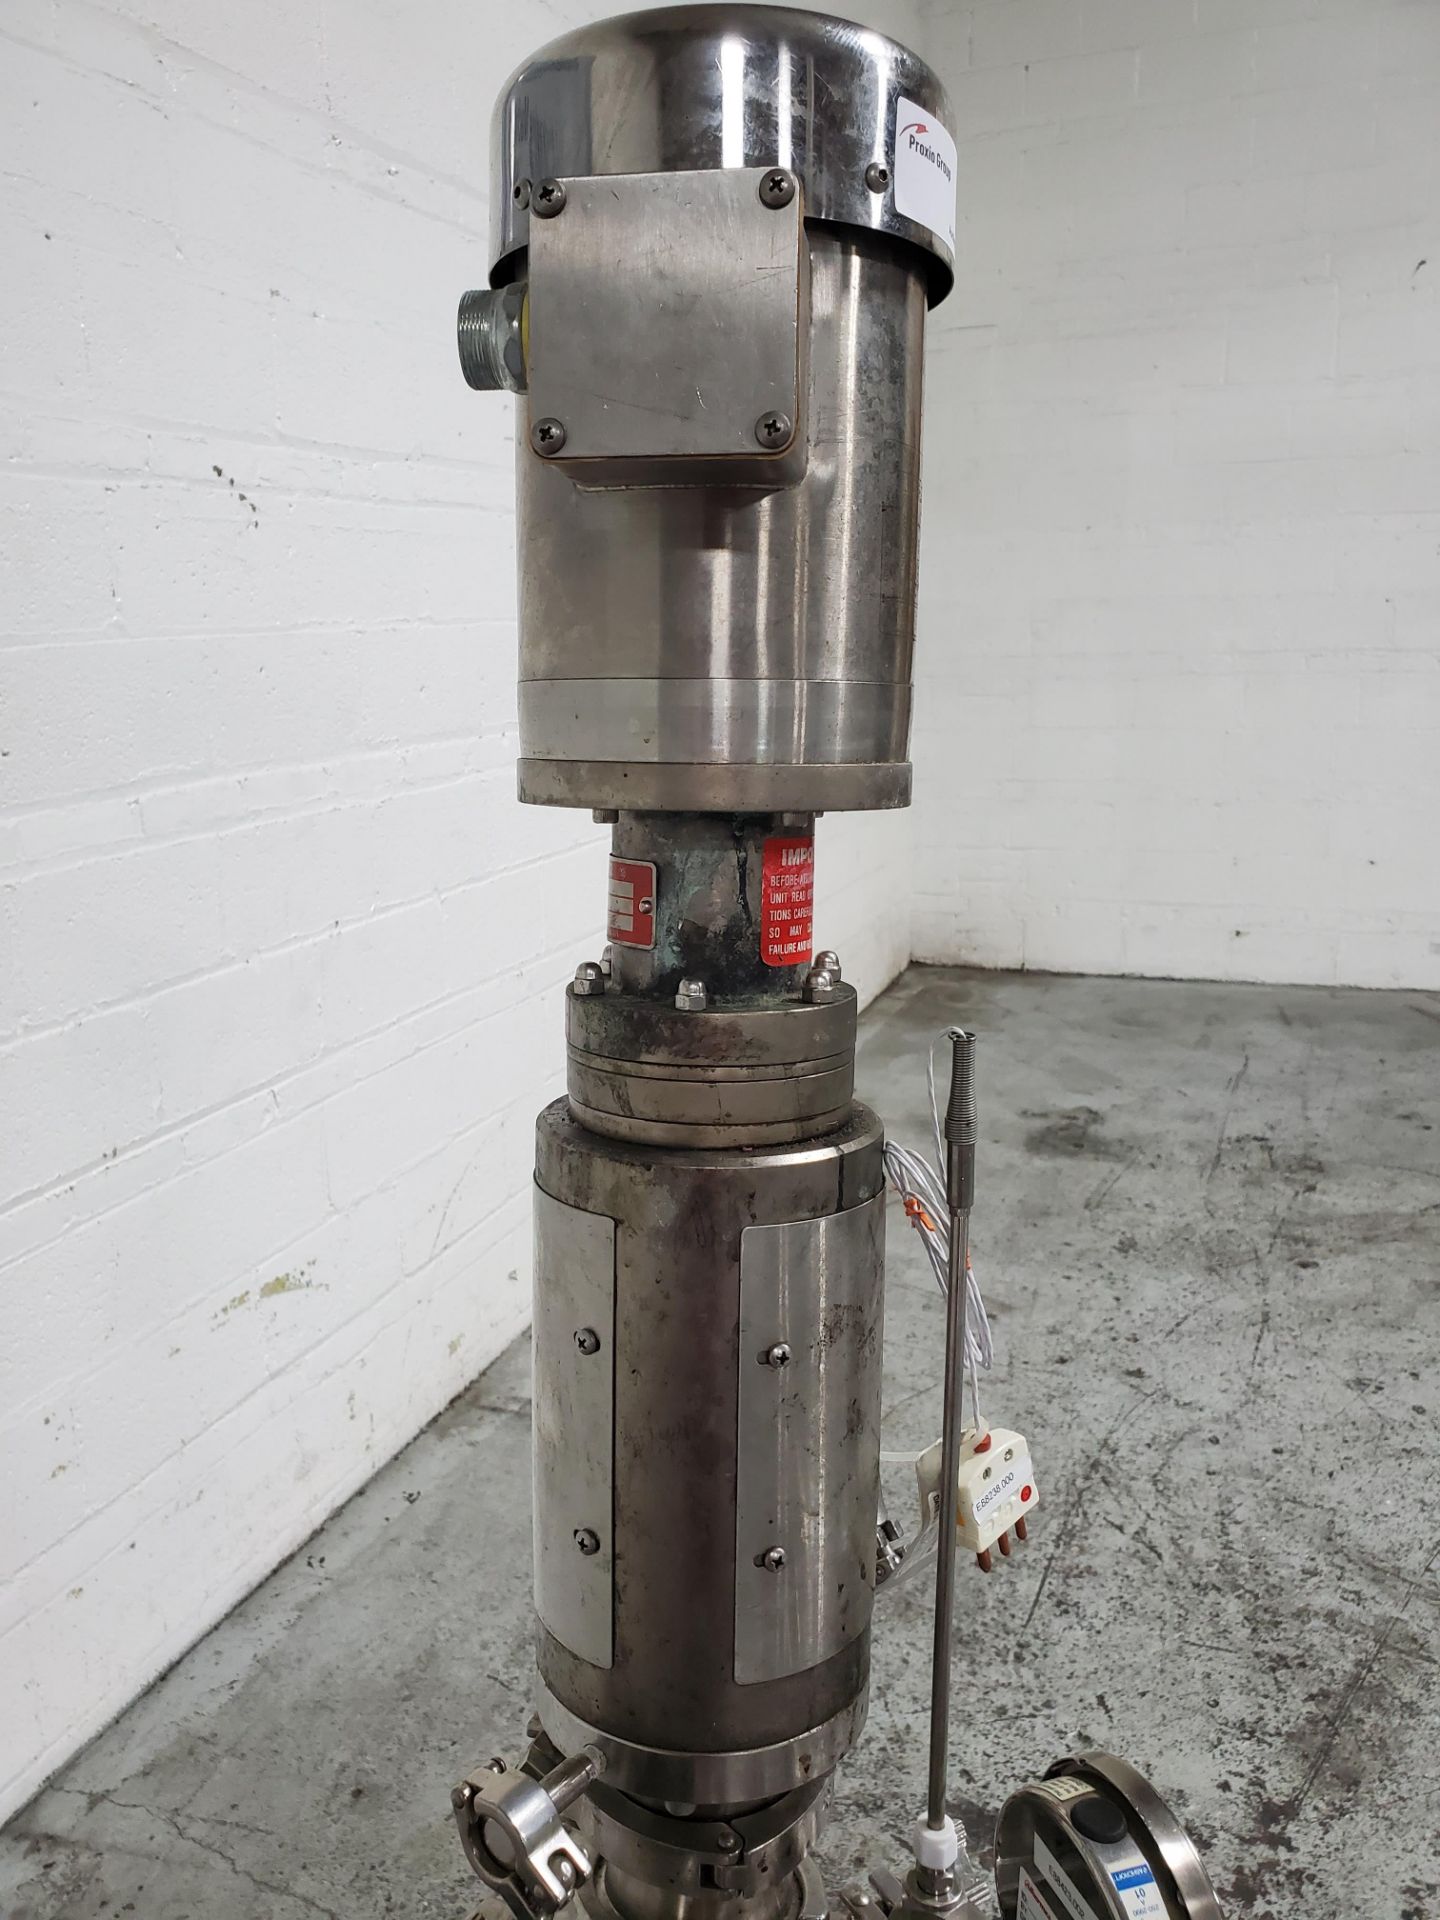 50 liter Precision reactor, 316L stainless steel construction, 13" diameter x 18" straight side, - Image 10 of 11